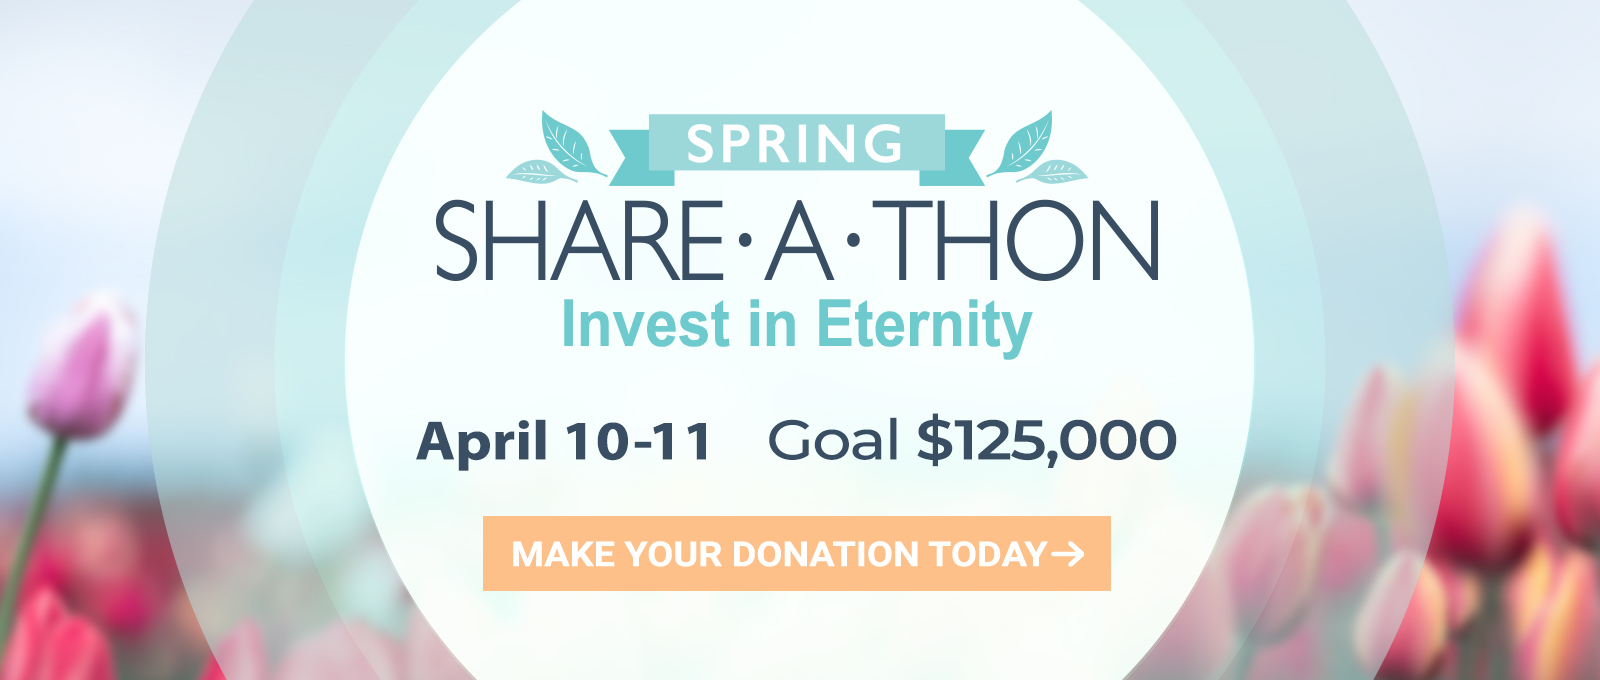 Spring Share-a-thon Goal